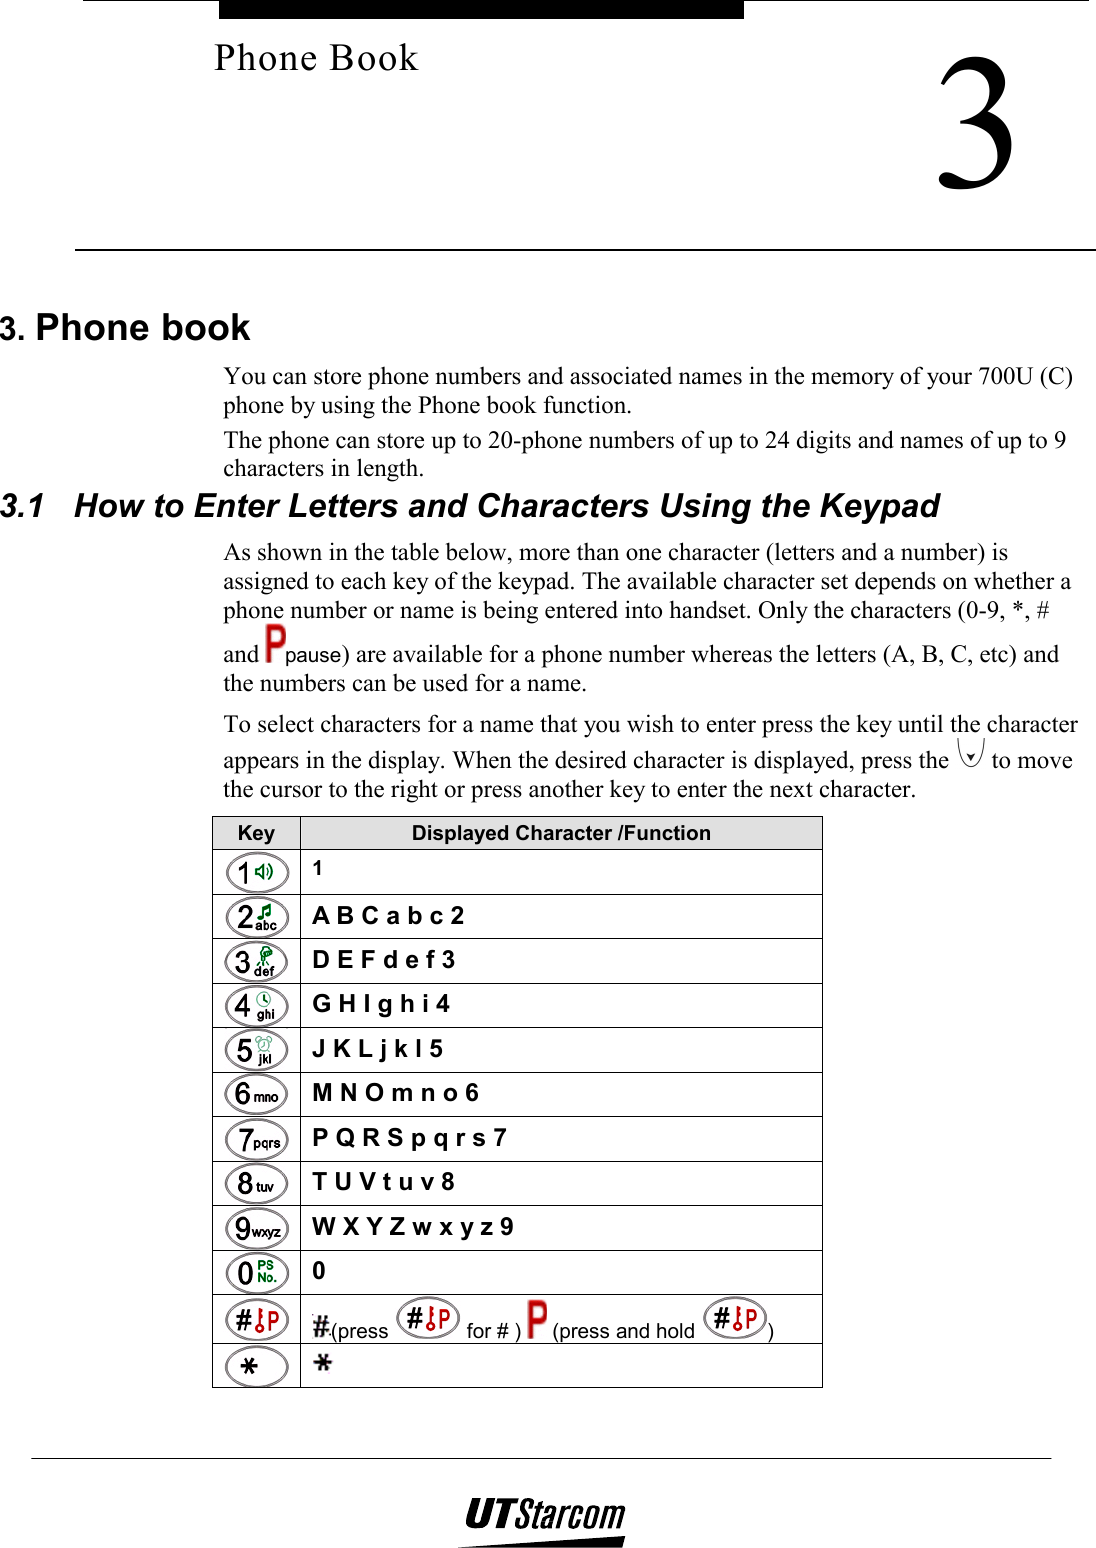     3Phone Book 3. Phone book You can store phone numbers and associated names in the memory of your 700U (C) phone by using the Phone book function. The phone can store up to 20-phone numbers of up to 24 digits and names of up to 9 characters in length. 3.1  How to Enter Letters and Characters Using the Keypad  As shown in the table below, more than one character (letters and a number) is assigned to each key of the keypad. The available character set depends on whether a phone number or name is being entered into handset. Only the characters (0-9, *, # and  pause) are available for a phone number whereas the letters (A, B, C, etc) and the numbers can be used for a name. To select characters for a name that you wish to enter press the key until the character appears in the display. When the desired character is displayed, press the   to move the cursor to the right or press another key to enter the next character. Key Displayed Character /Function  1  A B C a b c 2  D E F d e f 3  G H I g h i 4  J K L j k l 5  M N O m n o 6  P Q R S p q r s 7  T U V t u v 8  W X Y Z w x y z 9  0  (press   for # )   (press and hold  )   